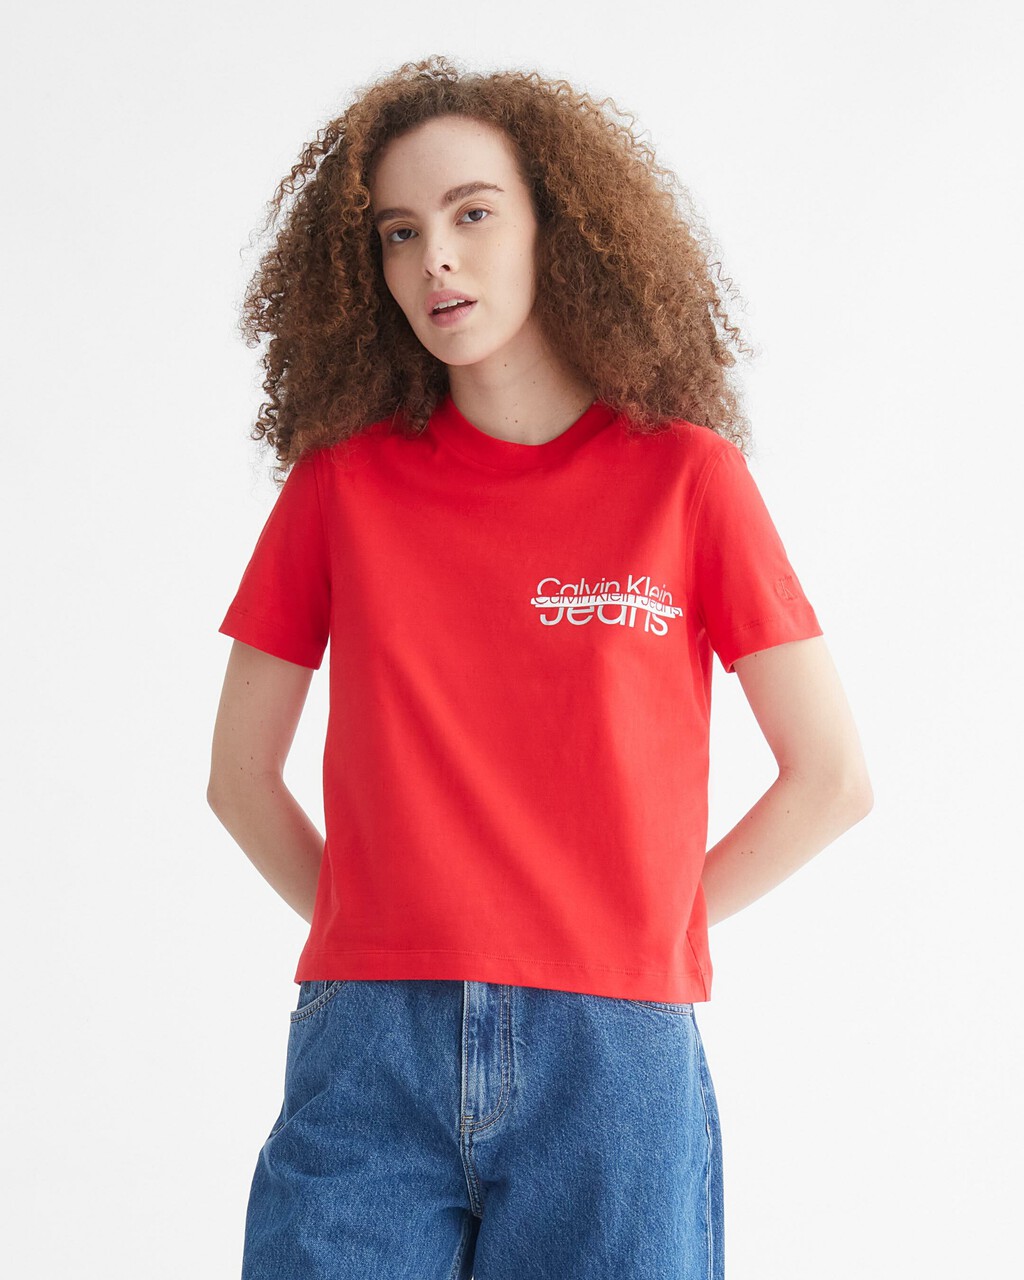 WINTER WHITES GRAPHIC LOGO TEE, CANDY APPLE, hi-res